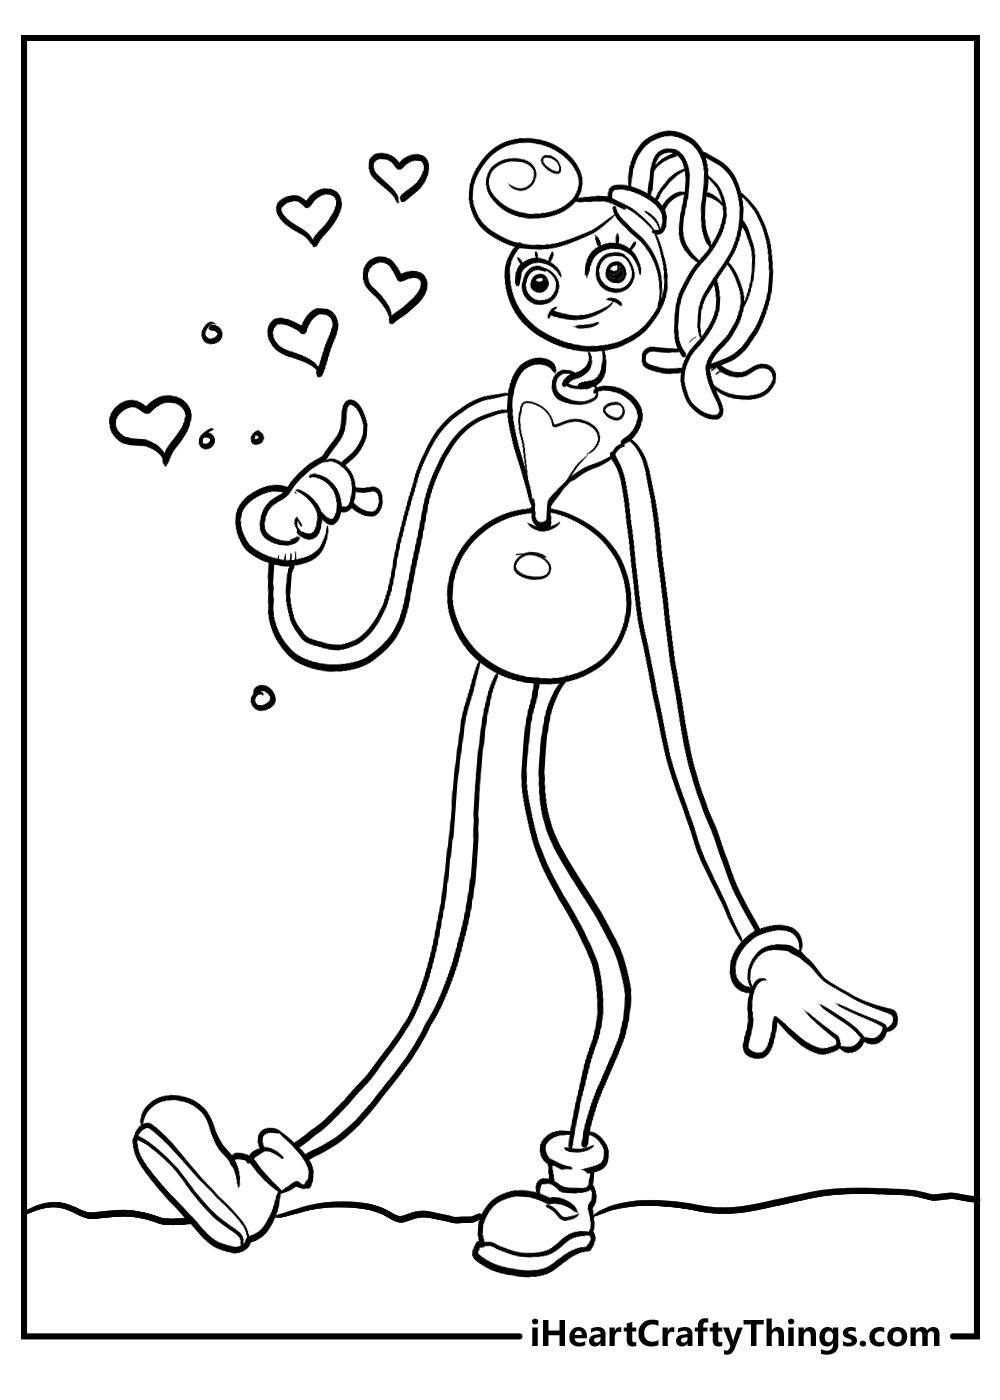 Coloring Pages Poppy Playtime - Christmas